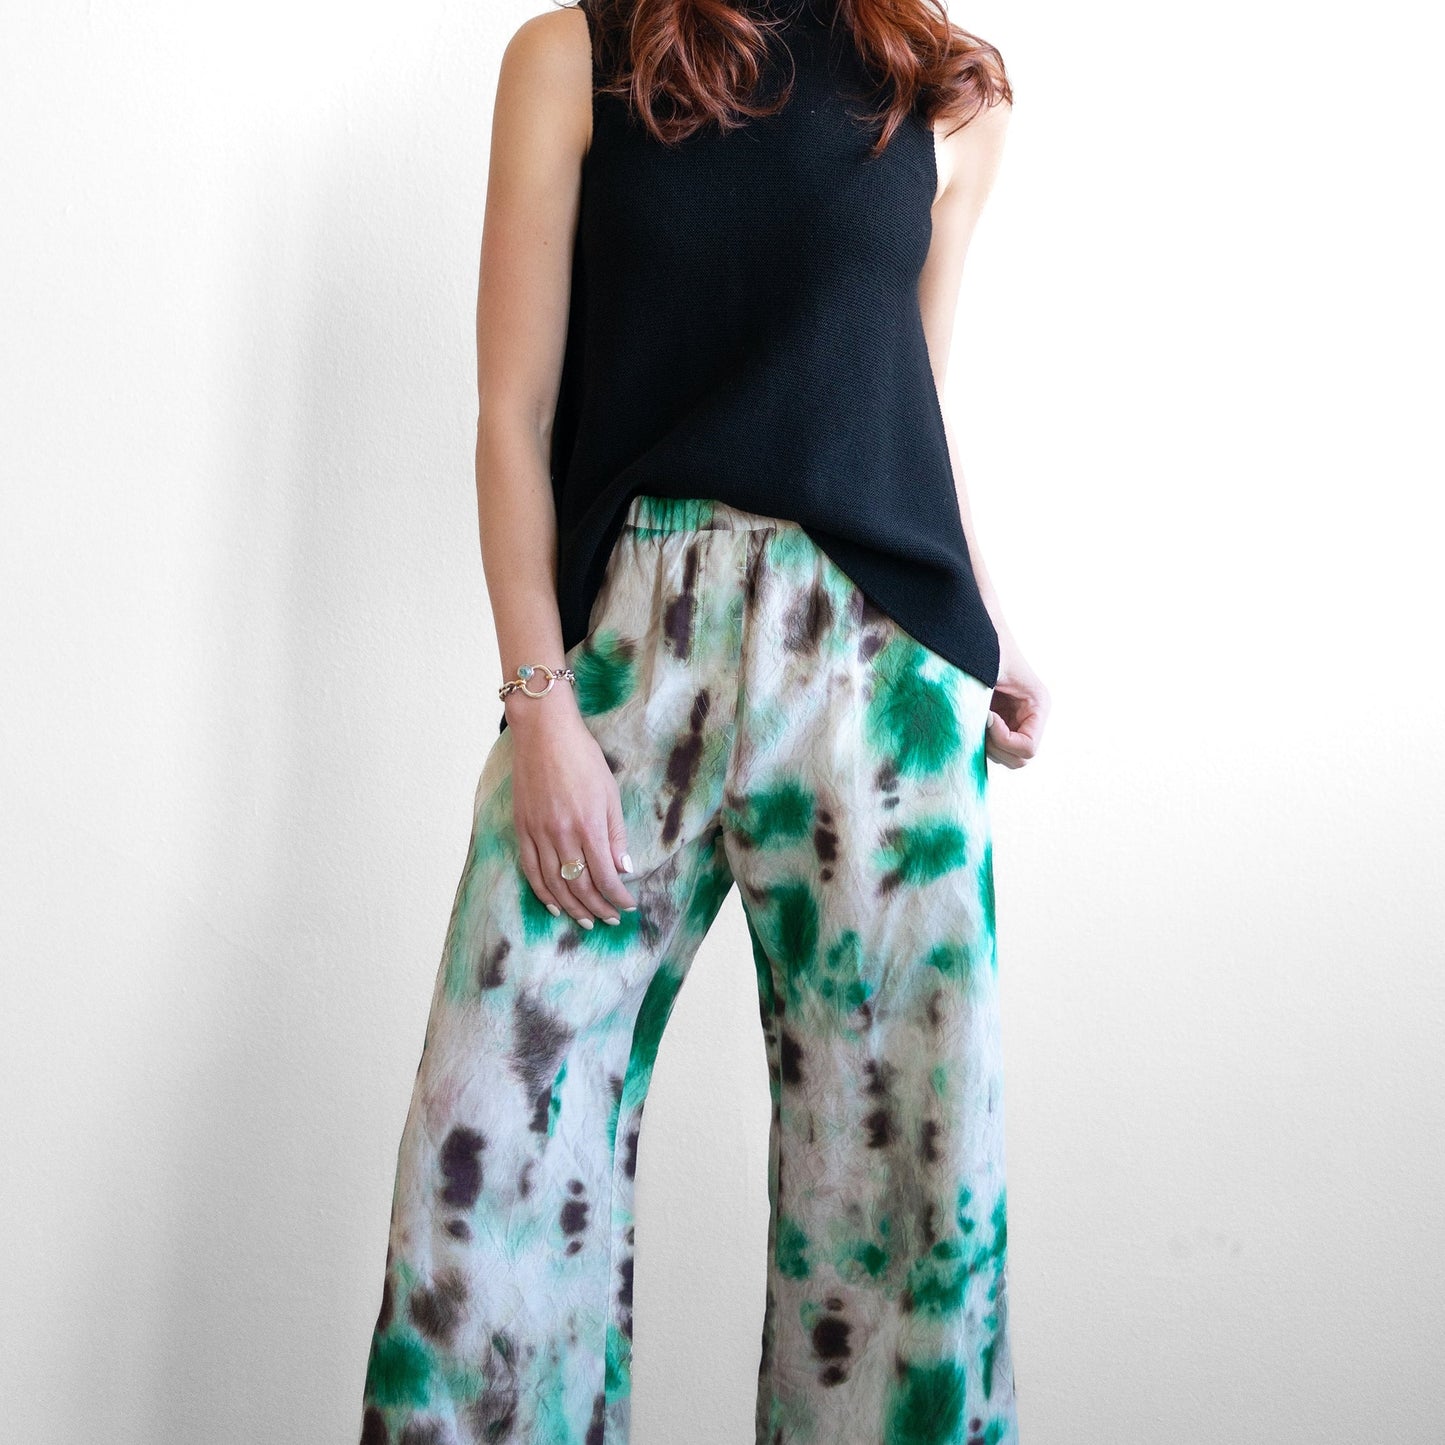 Parla Straight Leg Pant in Emerald Pigments